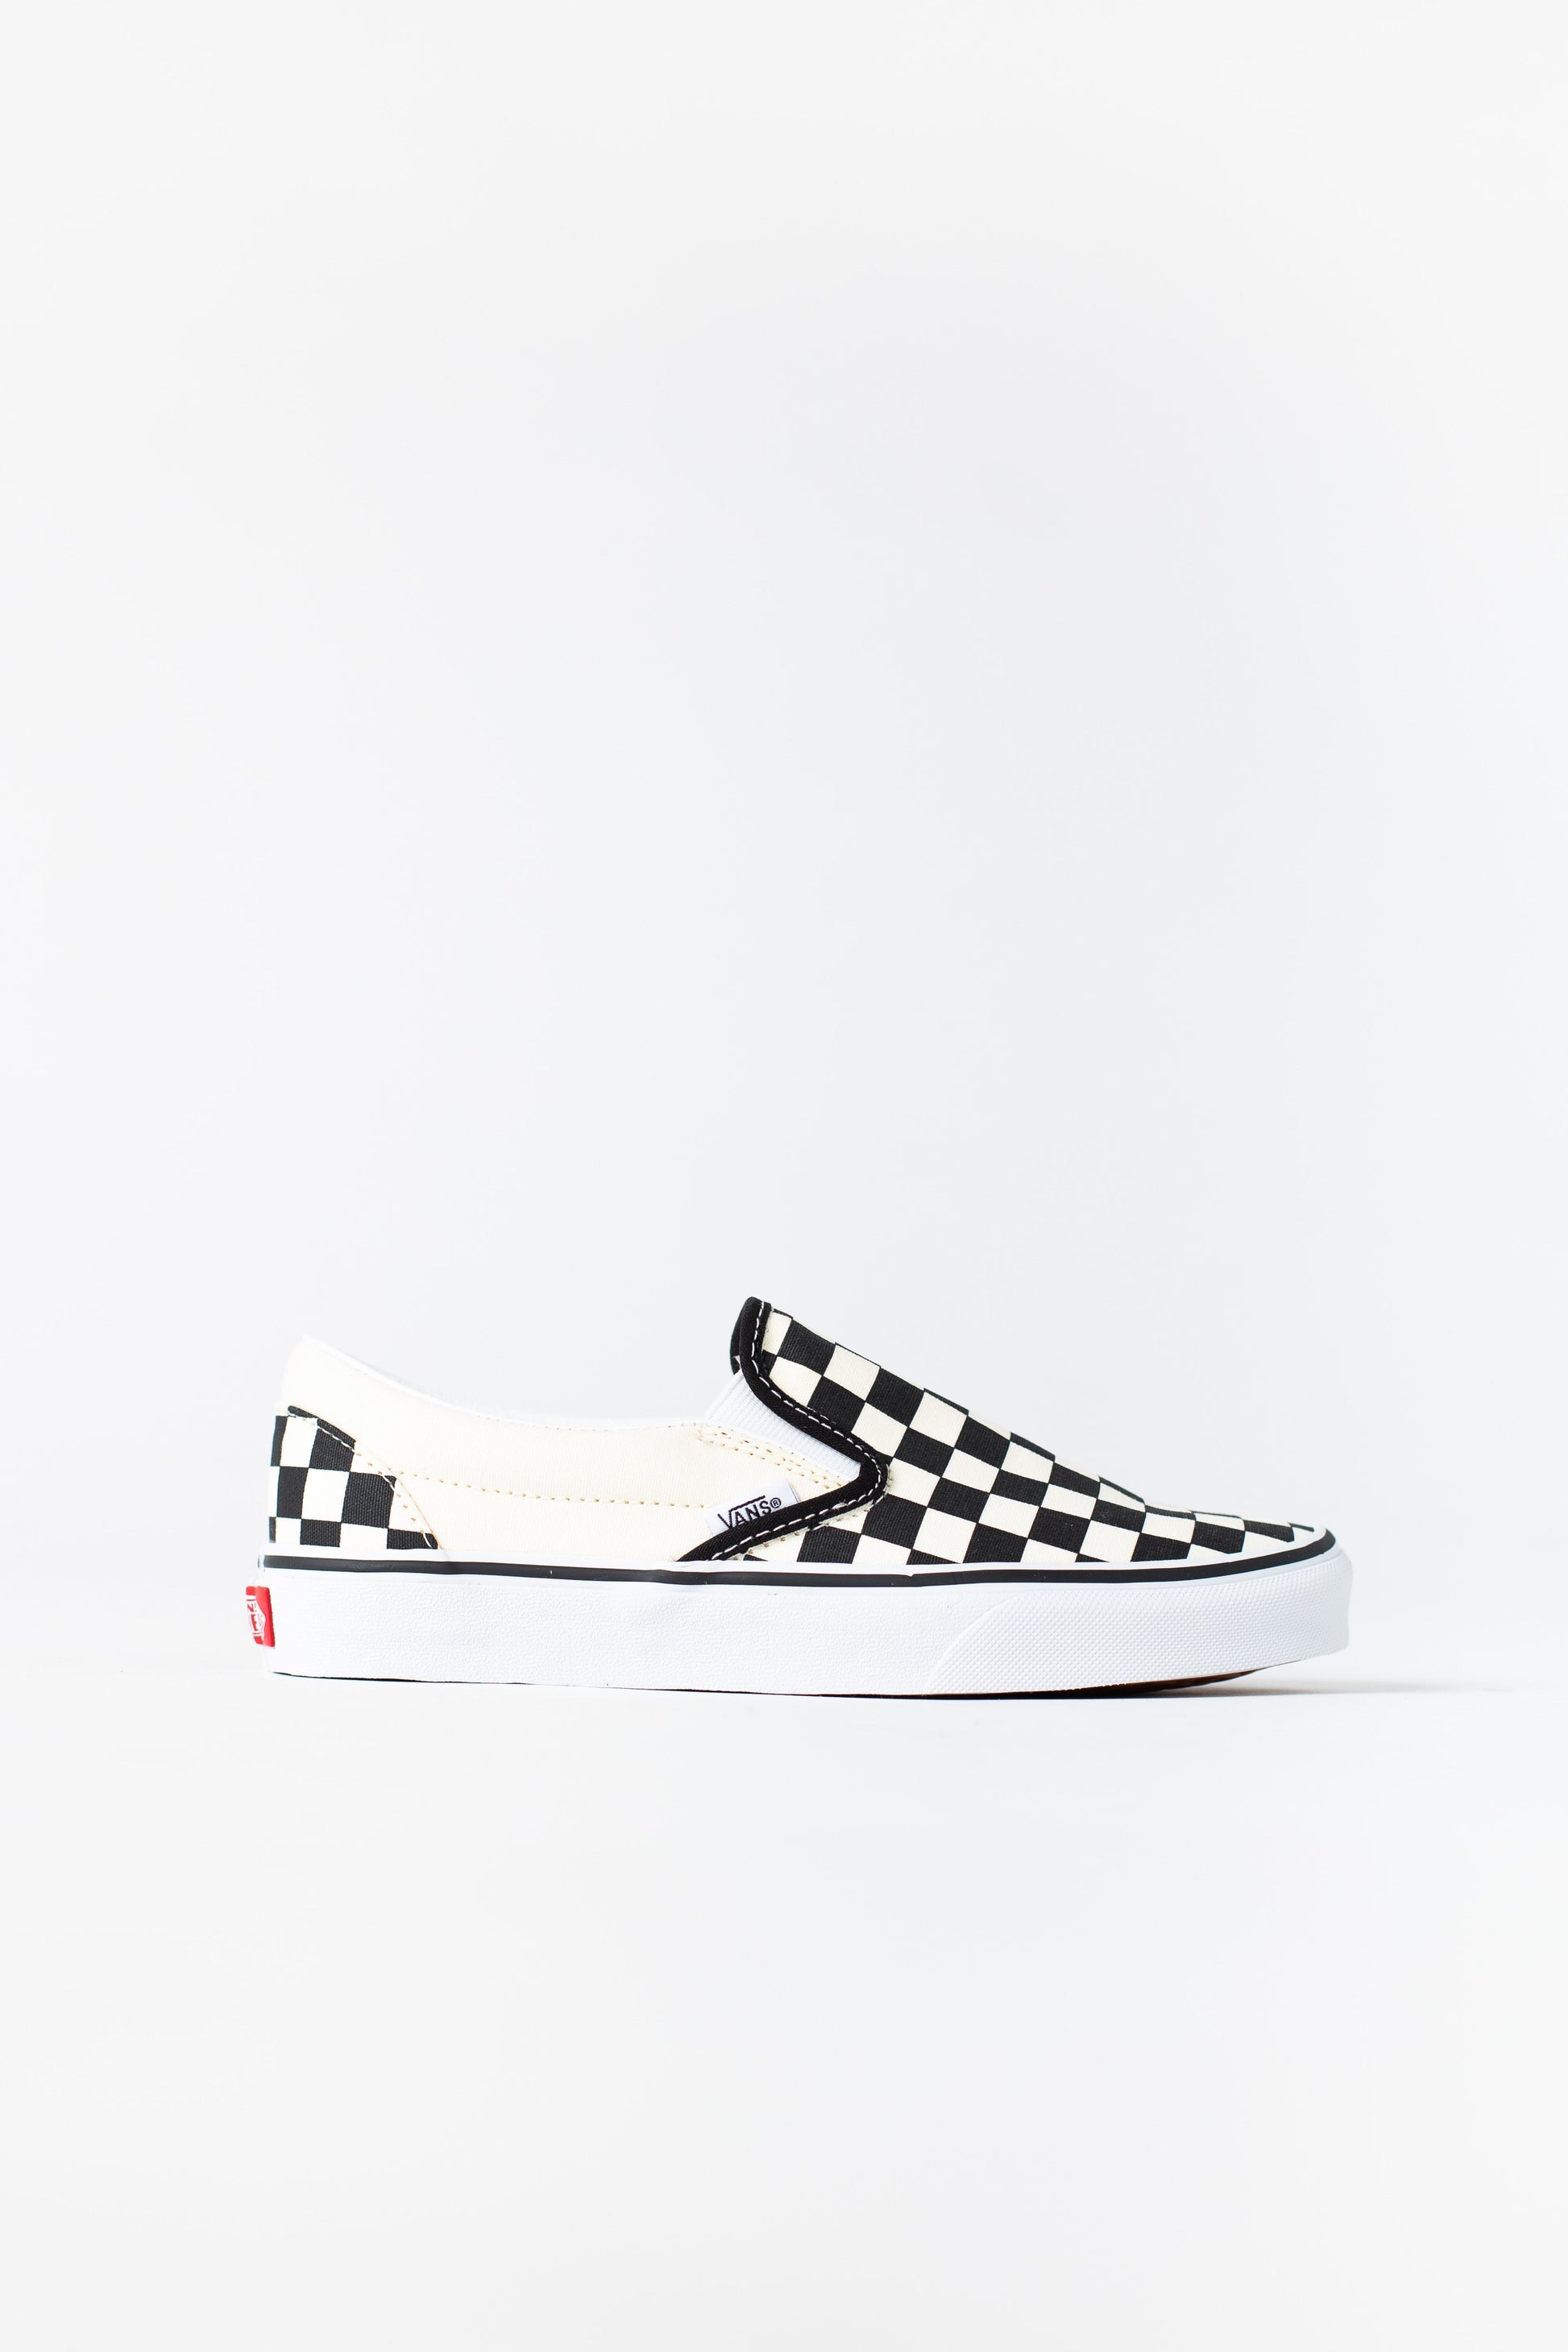 Vans Classic Checkerboard Slip-On Shoes– Mainland Skate & Surf